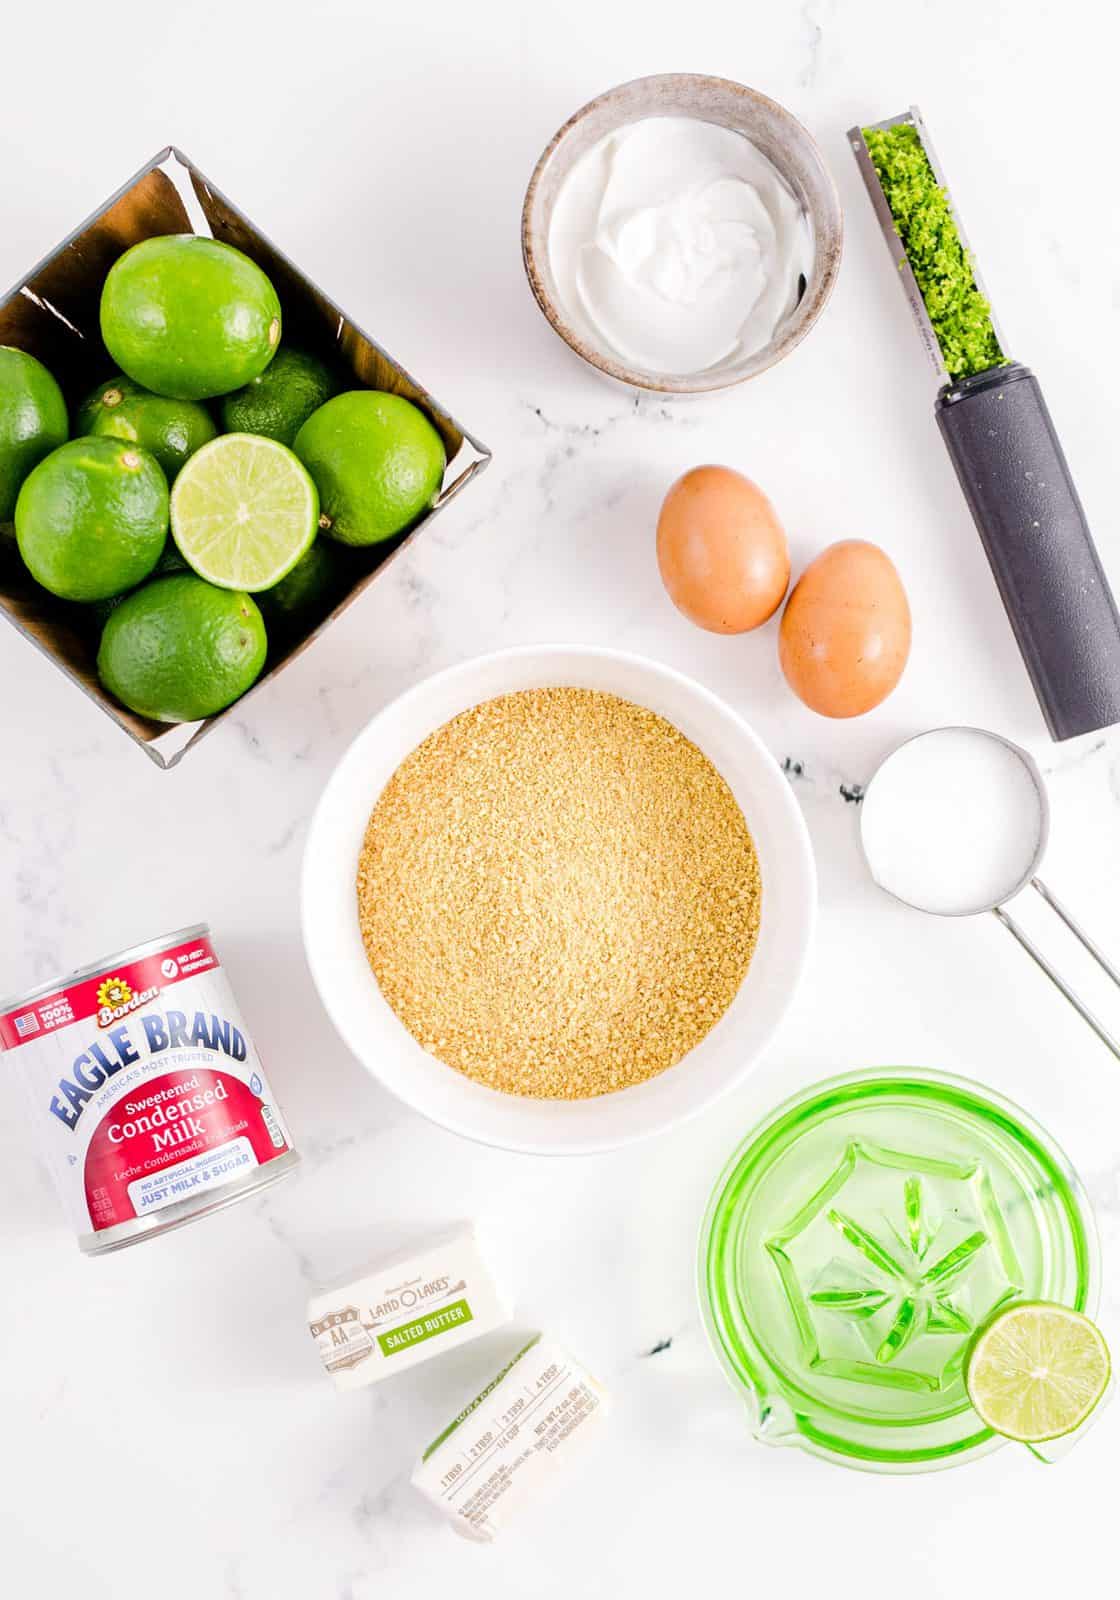 Ingredients needed: graham cracker crumbs, granulated sugar. salted butter, fresh key lime juice, key lime zest, sweetened condensed milk, sour cream and egg yolks.